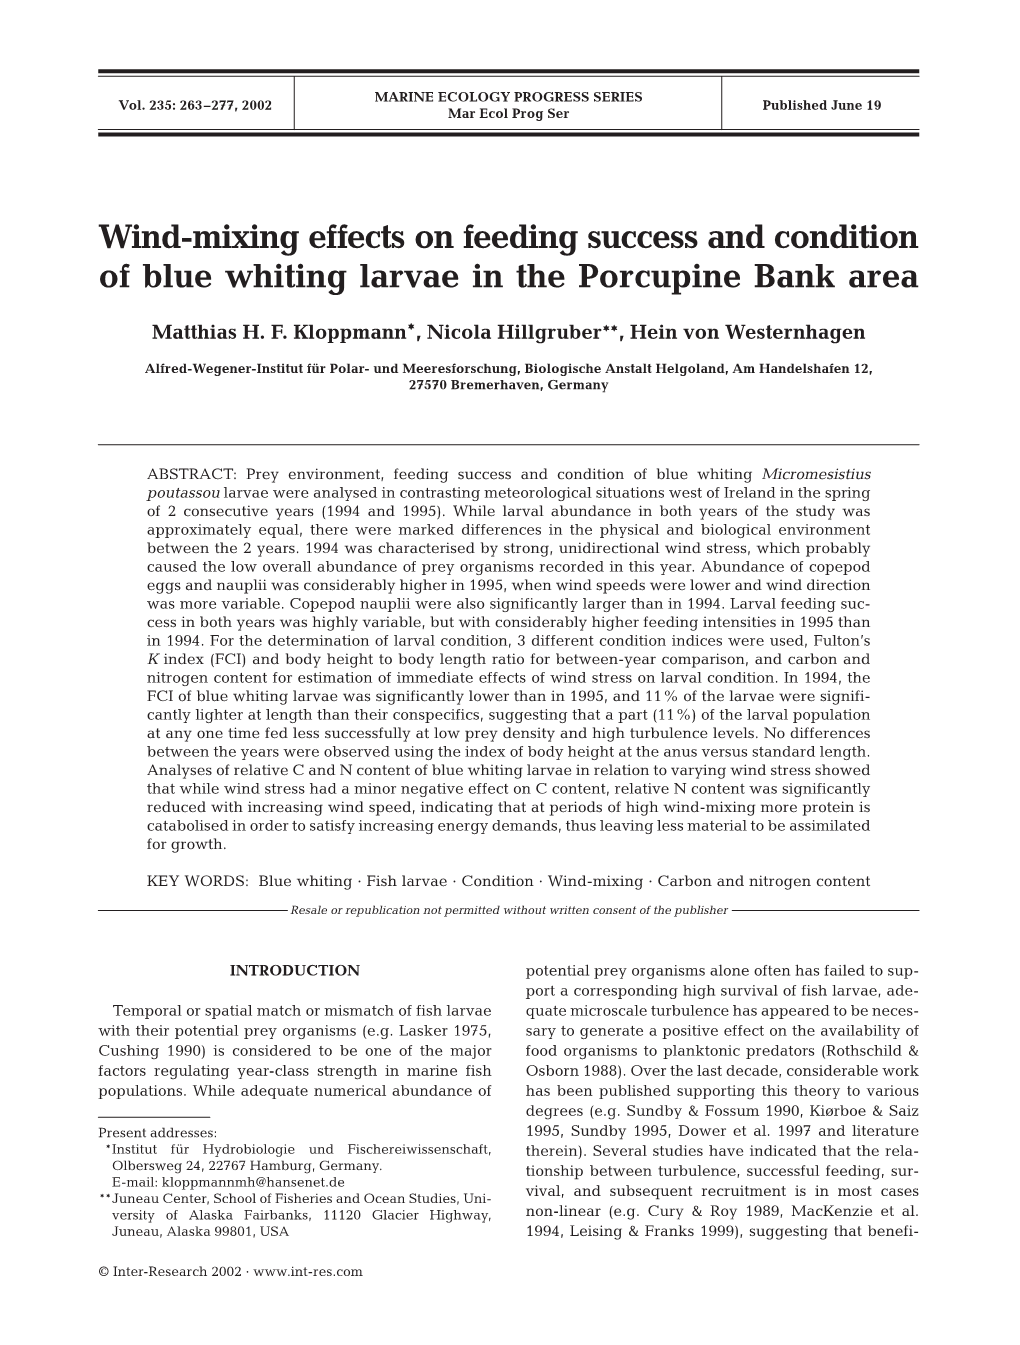 Wind-Mixing Effects on Feeding Success and Condition of Blue Whiting Larvae in the Porcupine Bank Area